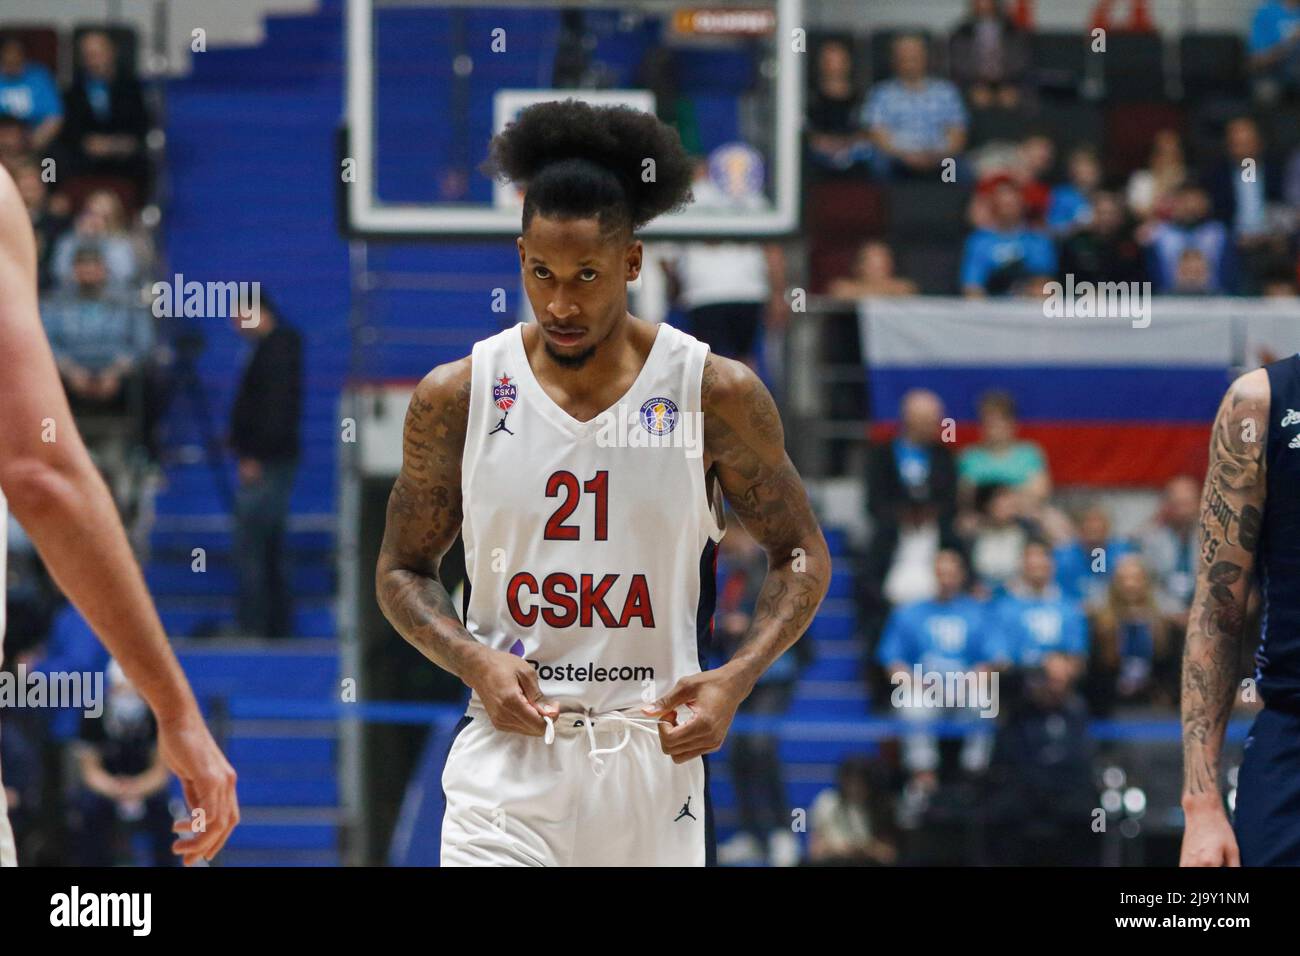 Will Clyburn (No.21) of CSKA seen in action during the third match final of  the VTB United League basketball match between Zenit and CSKA at Sibur  Arena. Final score; Zenit Saint Petersburg